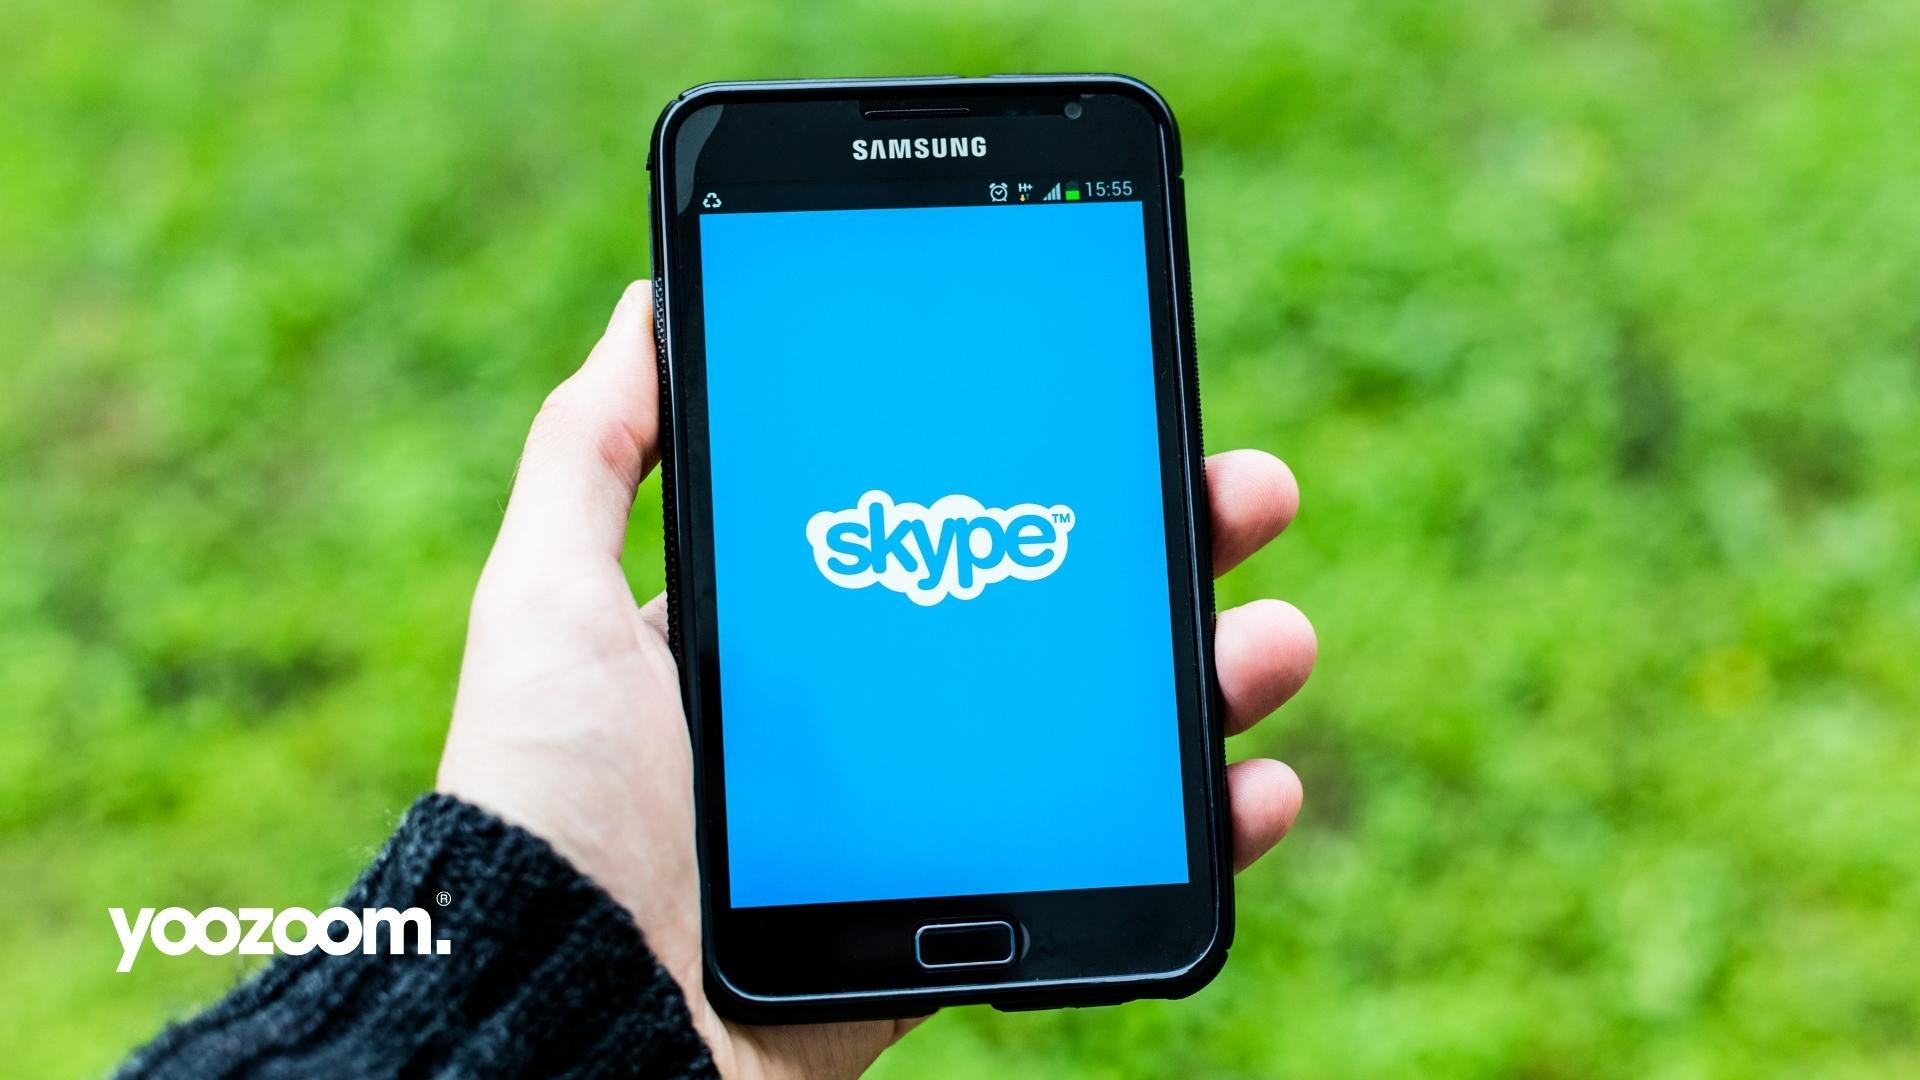 Ten years ago, Skype was everywhere. Now… not so much. But what happened, exactly?